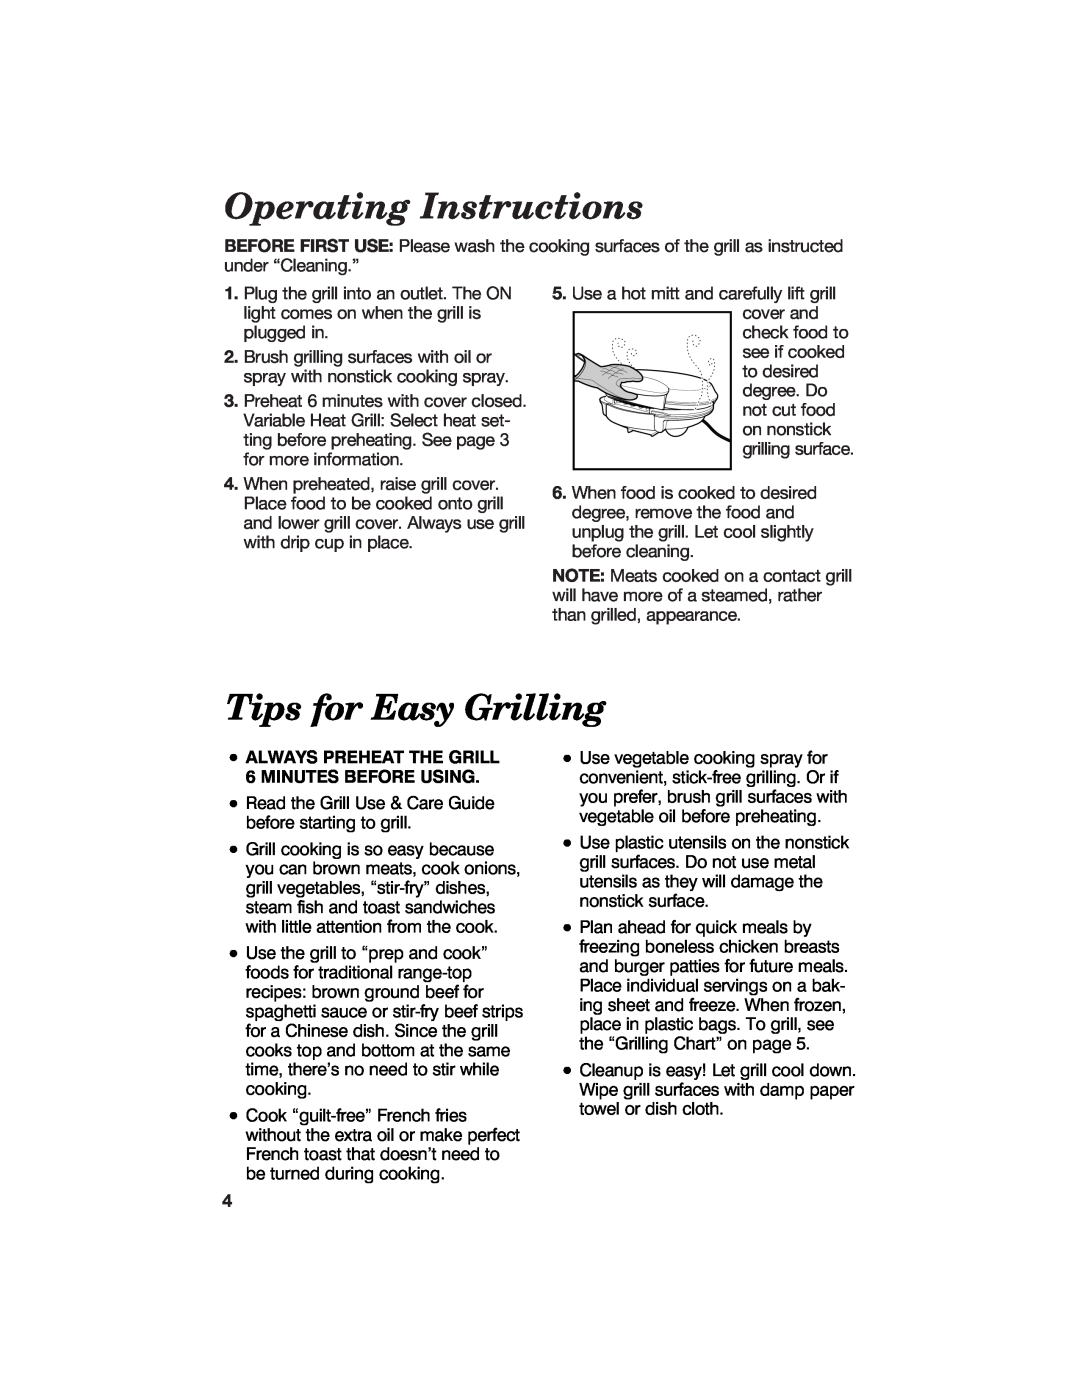 Hamilton Beach 840092400 Operating Instructions, Tips for Easy Grilling, ALWAYS PREHEAT THE GRILL 6 MINUTES BEFORE USING 